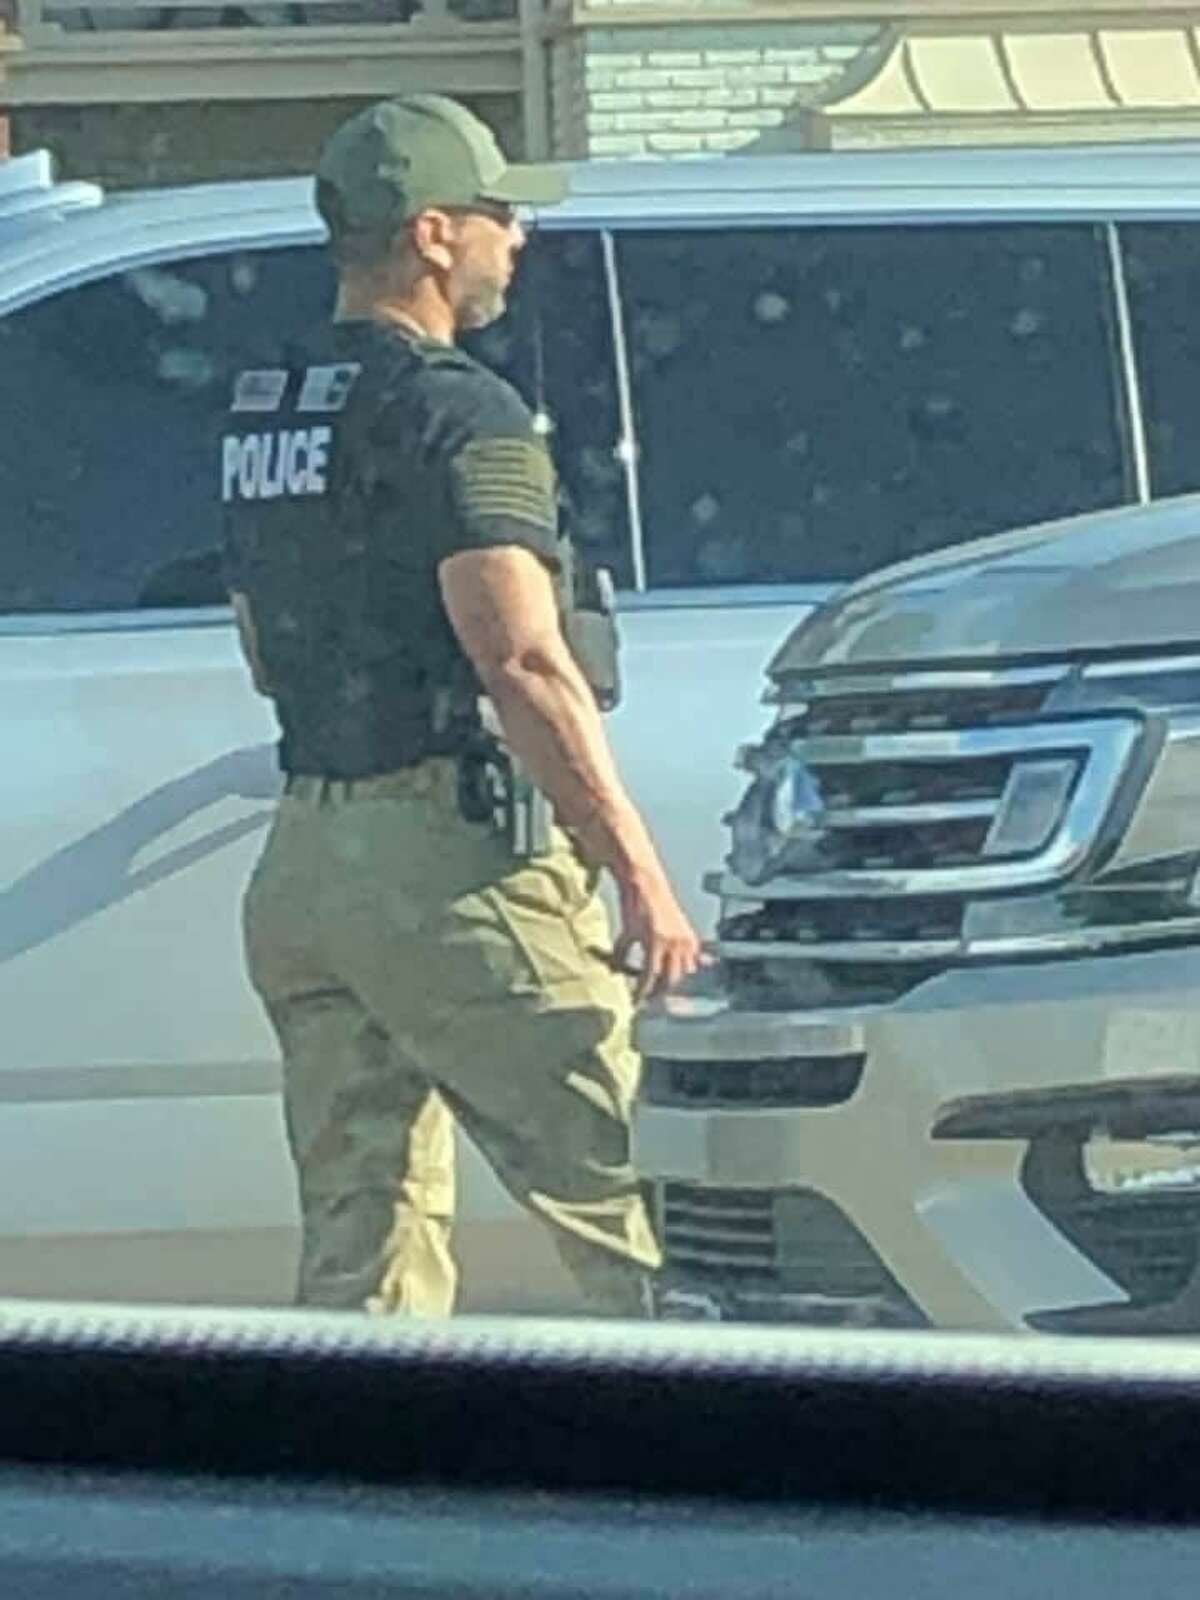 An immigration officer stands at a scene in southwest Houston where a man was injured in a crash involving a pursuit by immigration authorities.